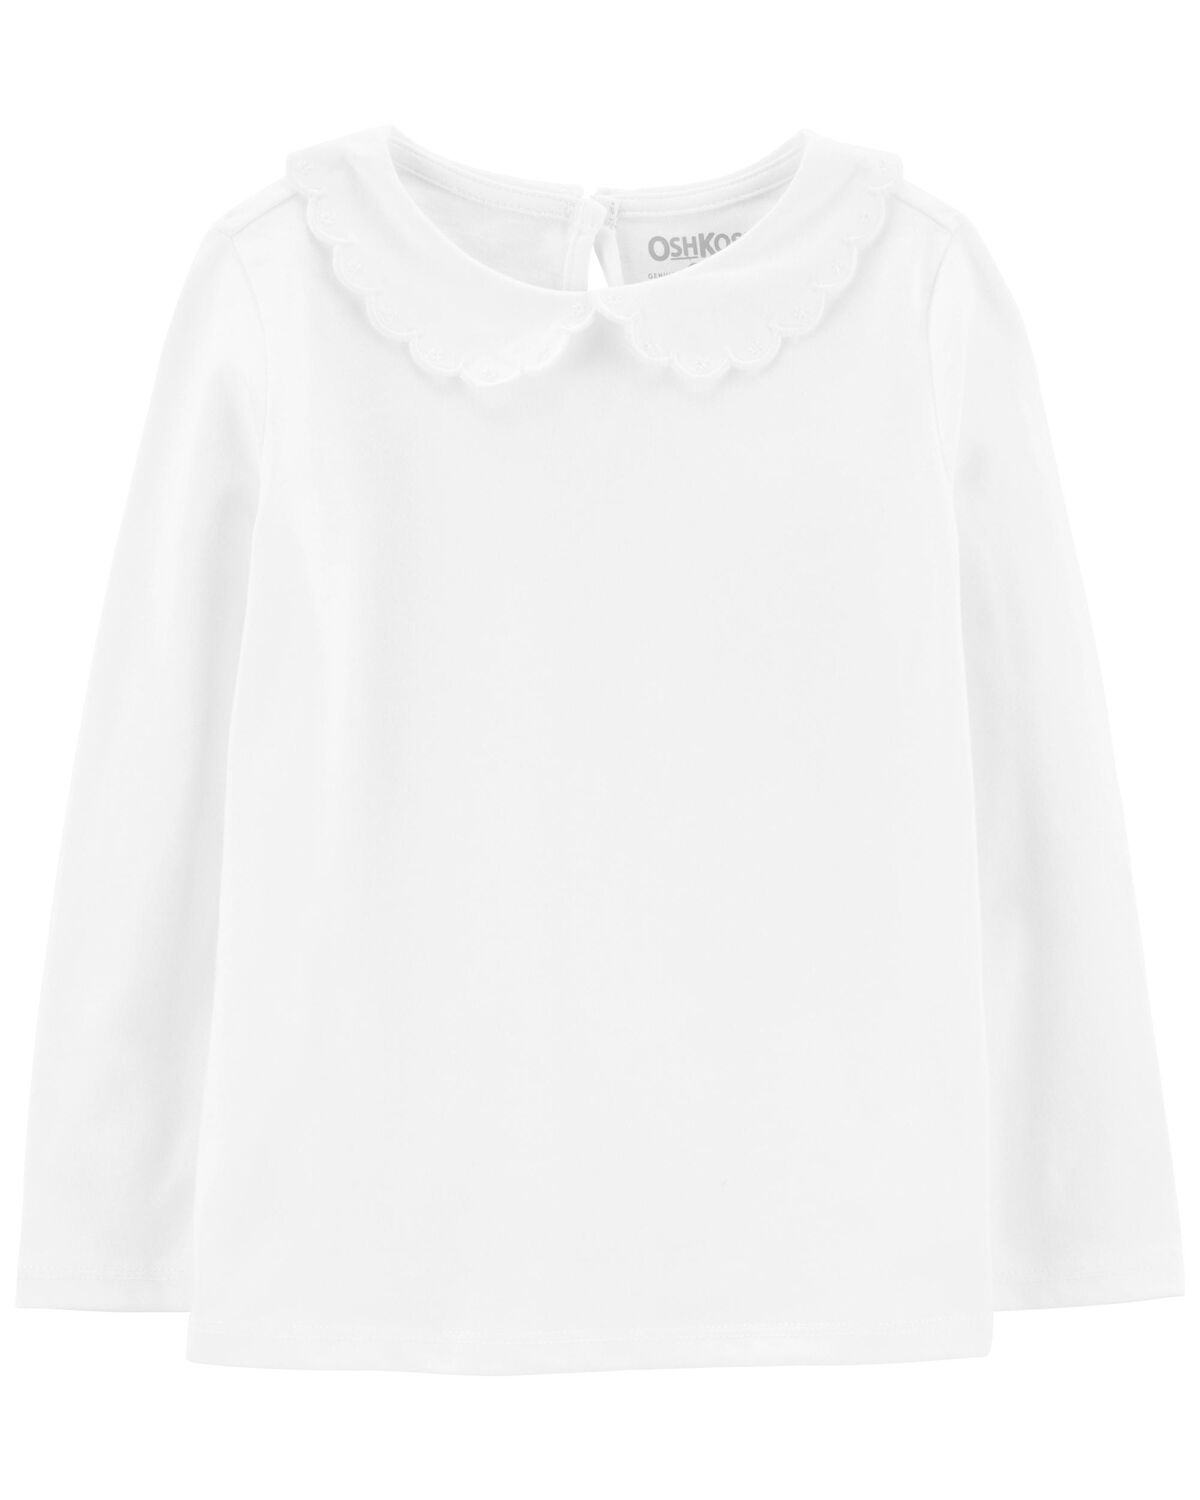 White Toddler Embroidered Peter Pan Collar Top | carters.com